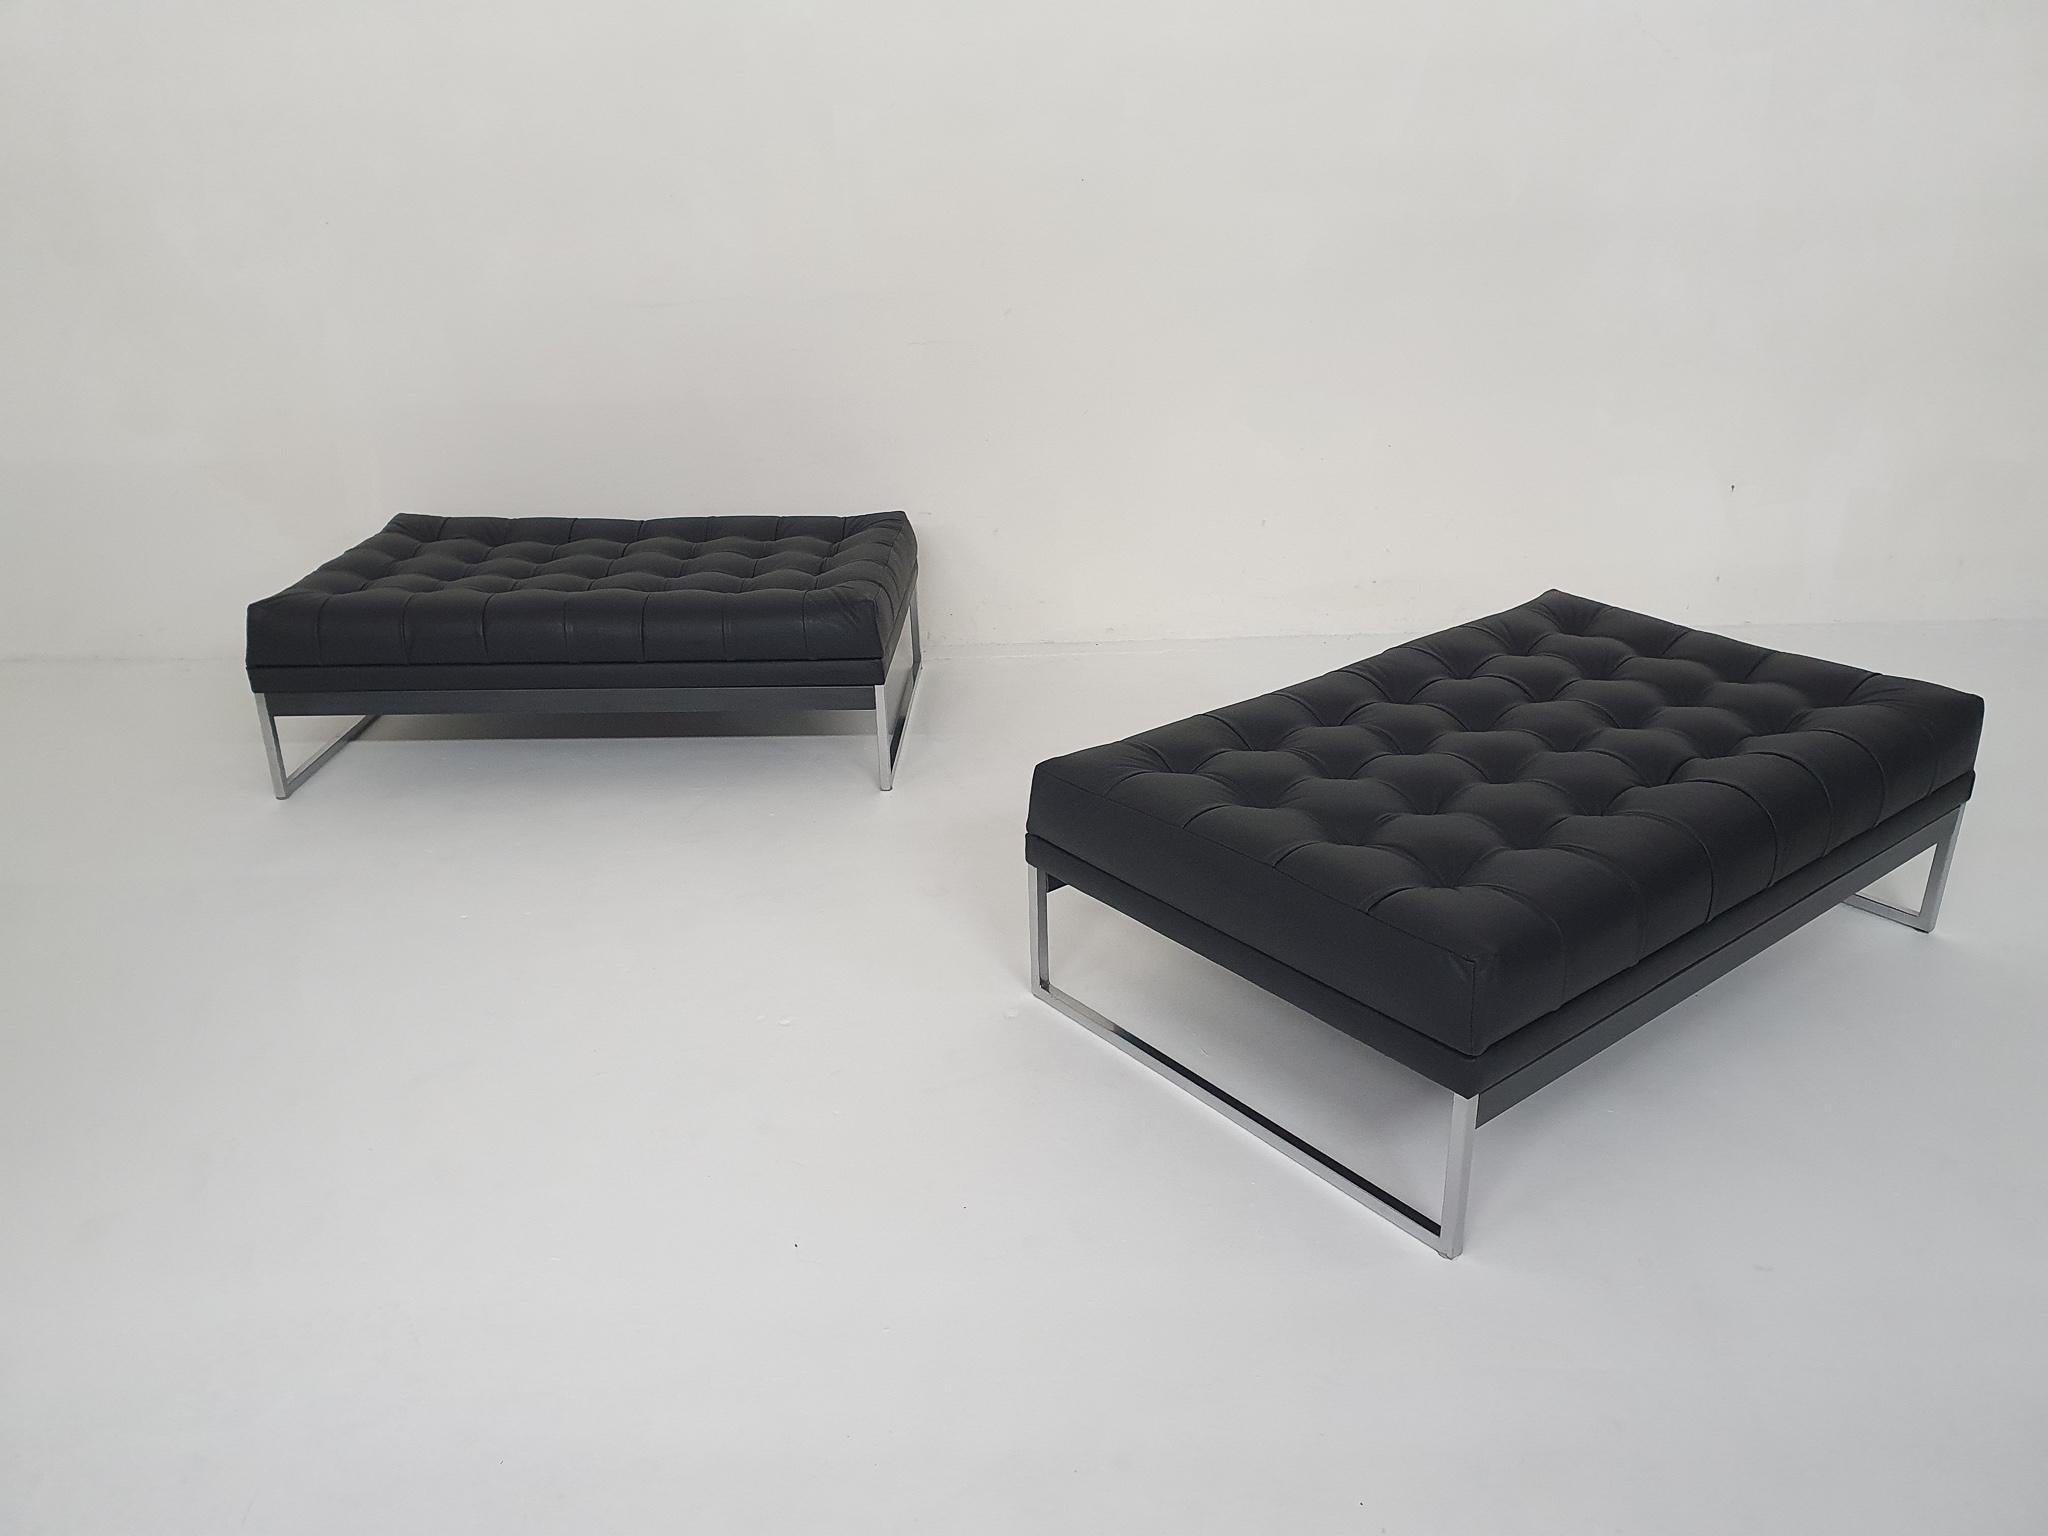 Metal benches with new black leather upholstery and new filling by AP originals.
Marked at the bottom.

